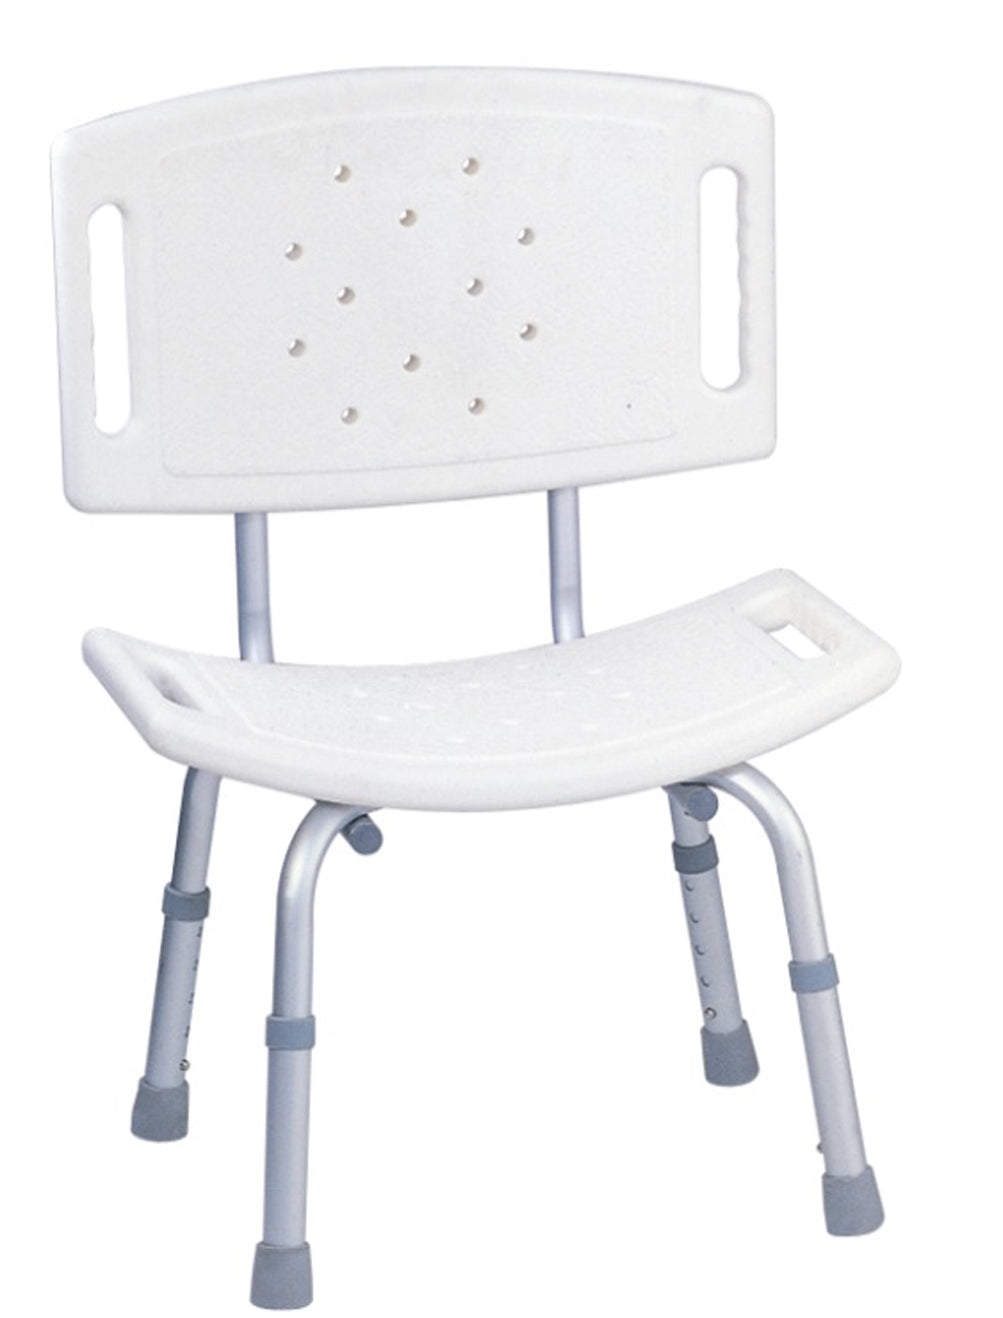 Shower chair with Backrest - Single